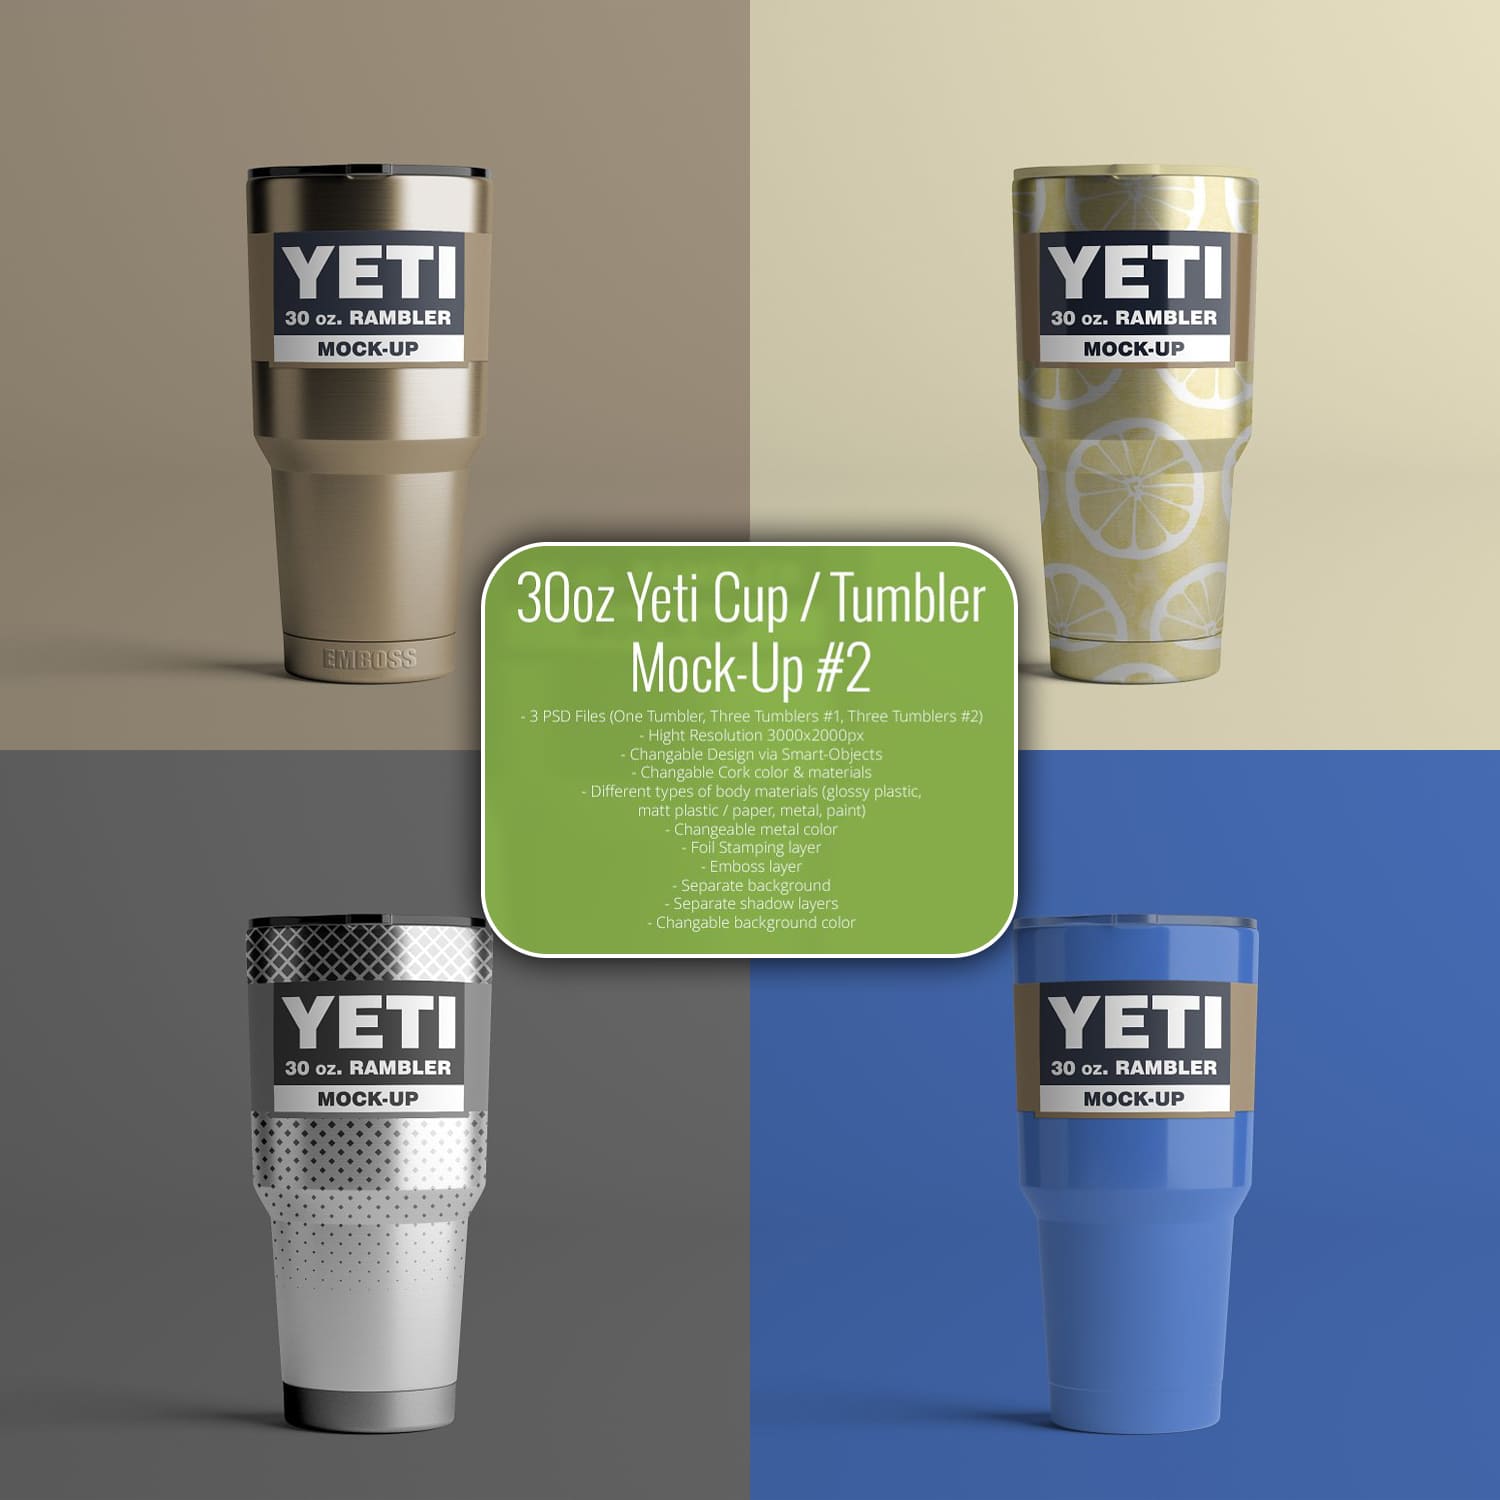 30oz. Yeti Cup / Tumbler Mock-Up #2 cover.